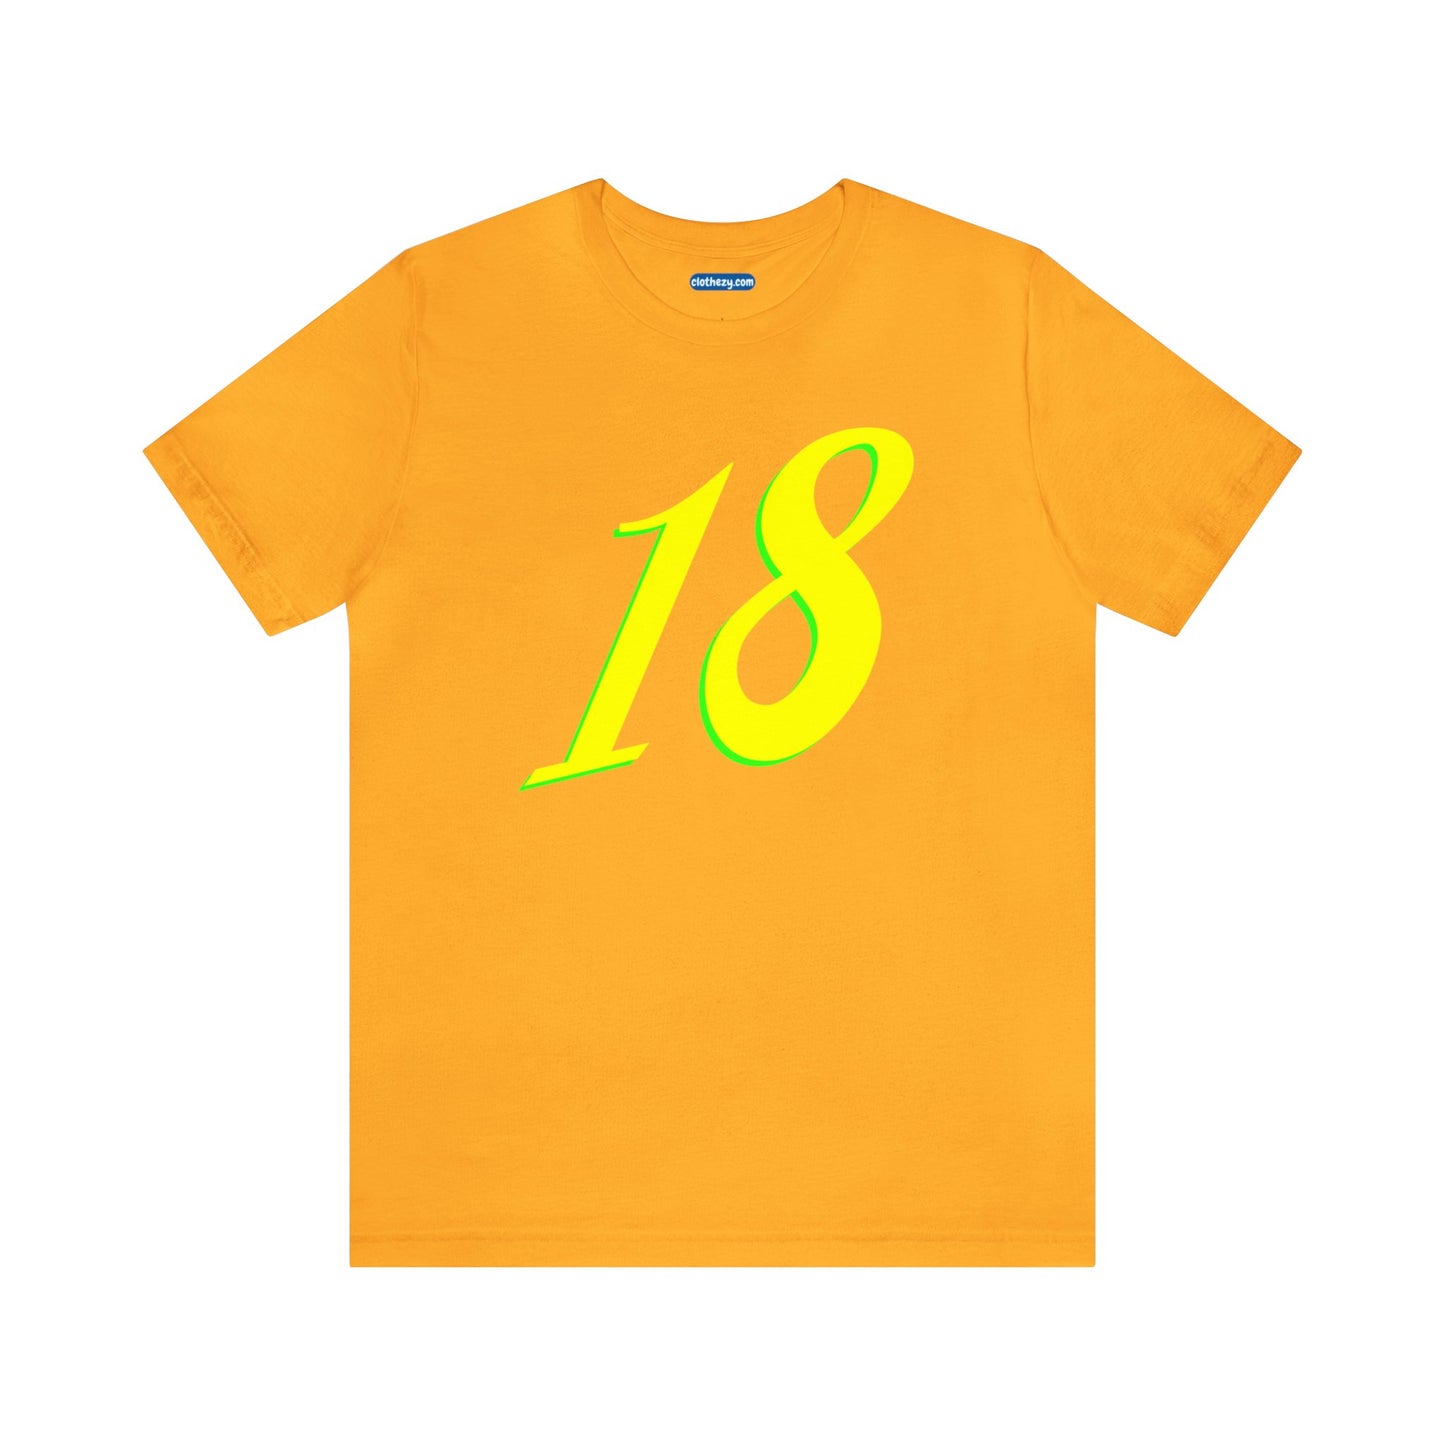 Number 18 Design - Soft Cotton Tee for birthdays and celebrations, Gift for friends and family, Multiple Options by clothezy.com in Gold Size Small - Buy Now